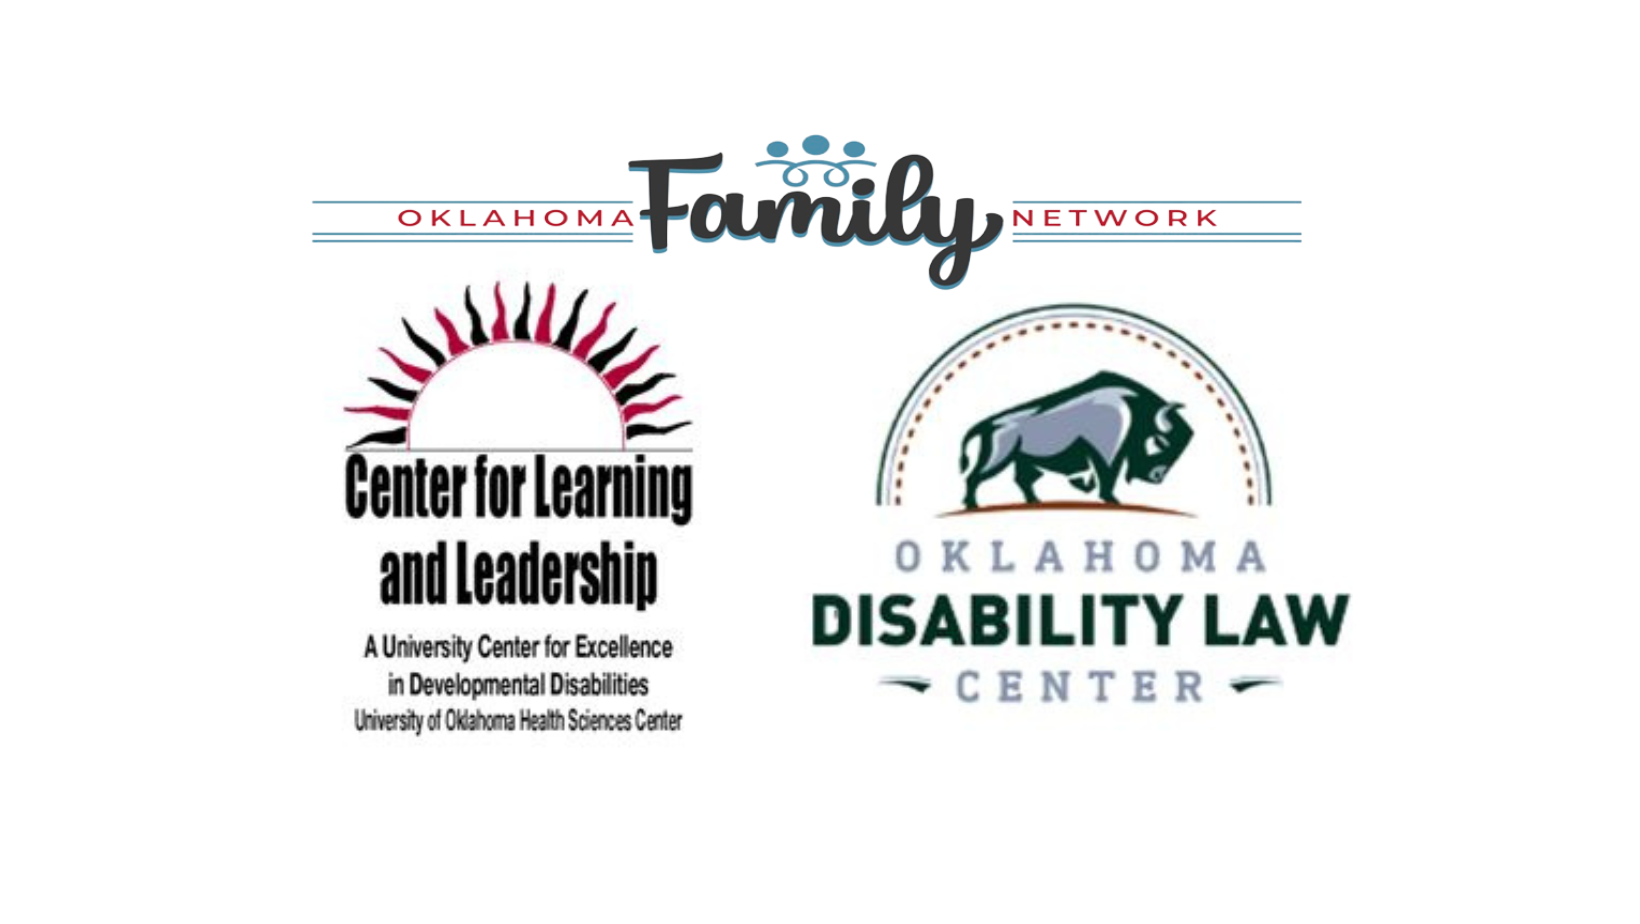 Logos for CLL OK Law Disability Center and OFN